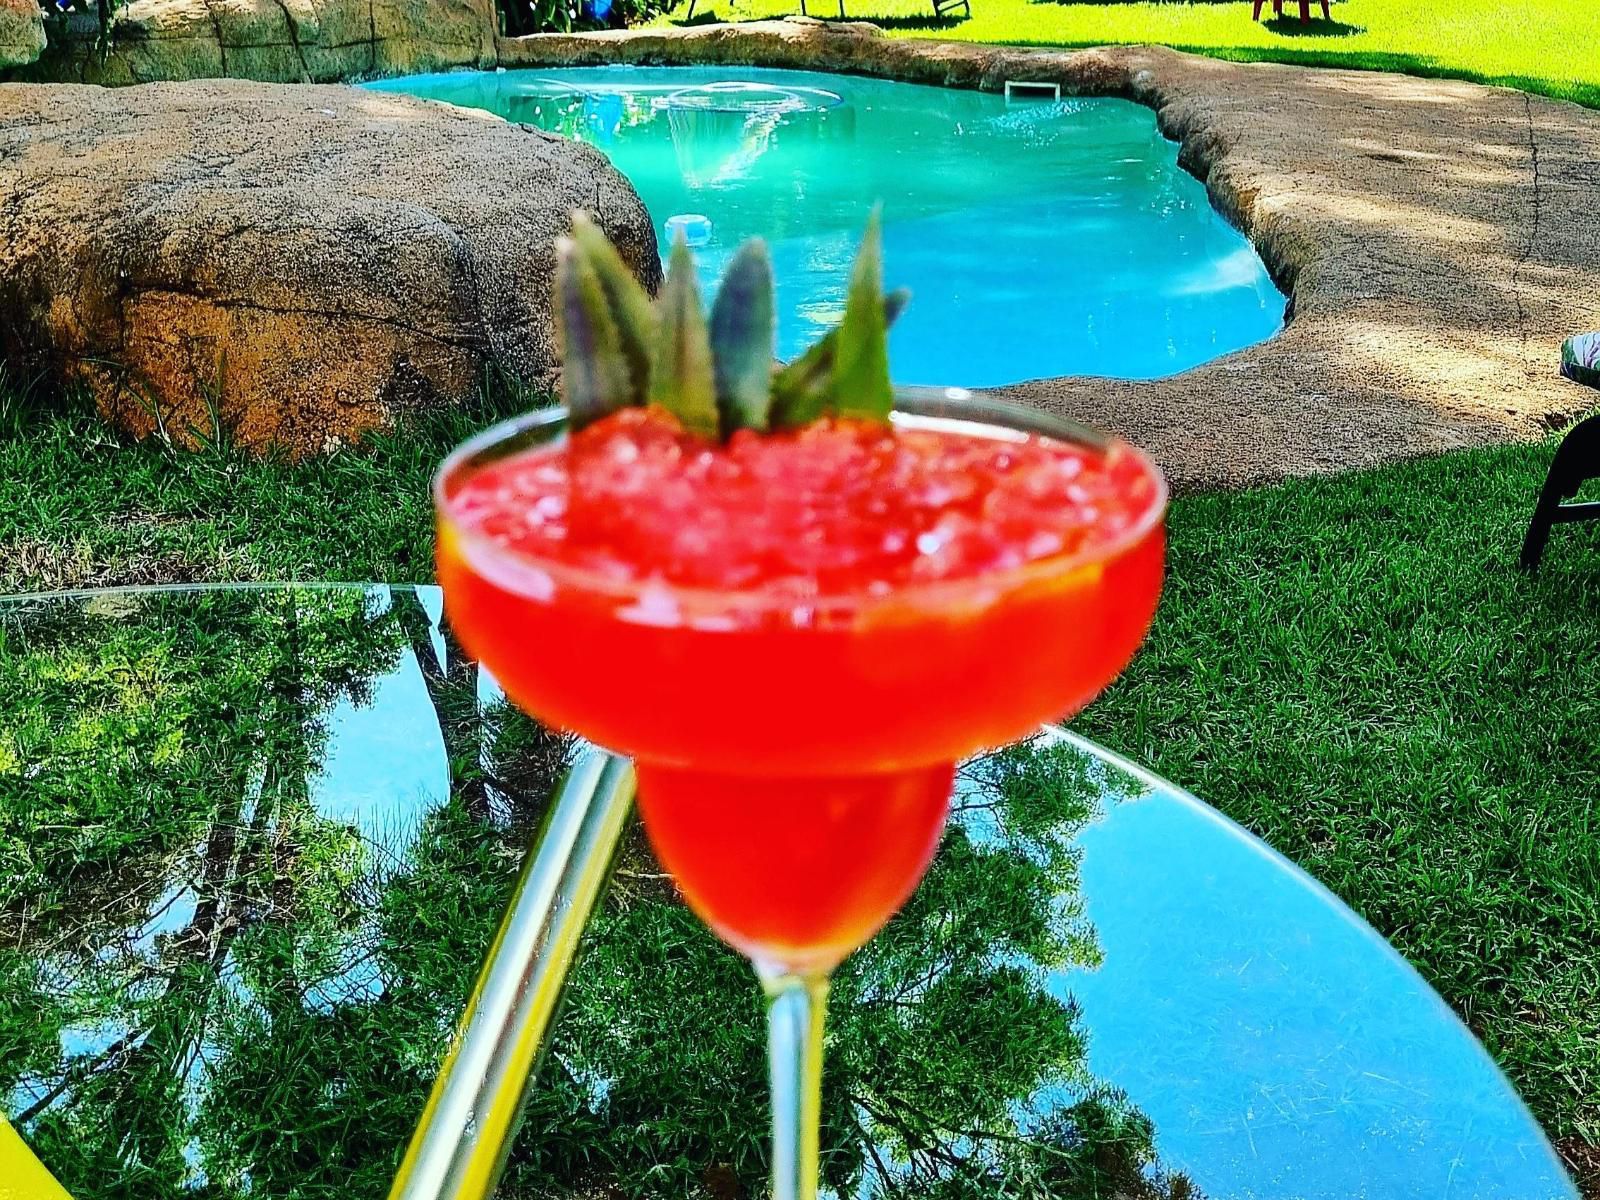 Richtershuyz Lifestyle Guesthouse Brooklyn Pretoria Tshwane Gauteng South Africa Complementary Colors, Cocktail, Drink, Watermelon, Fruit, Food, Swimming Pool